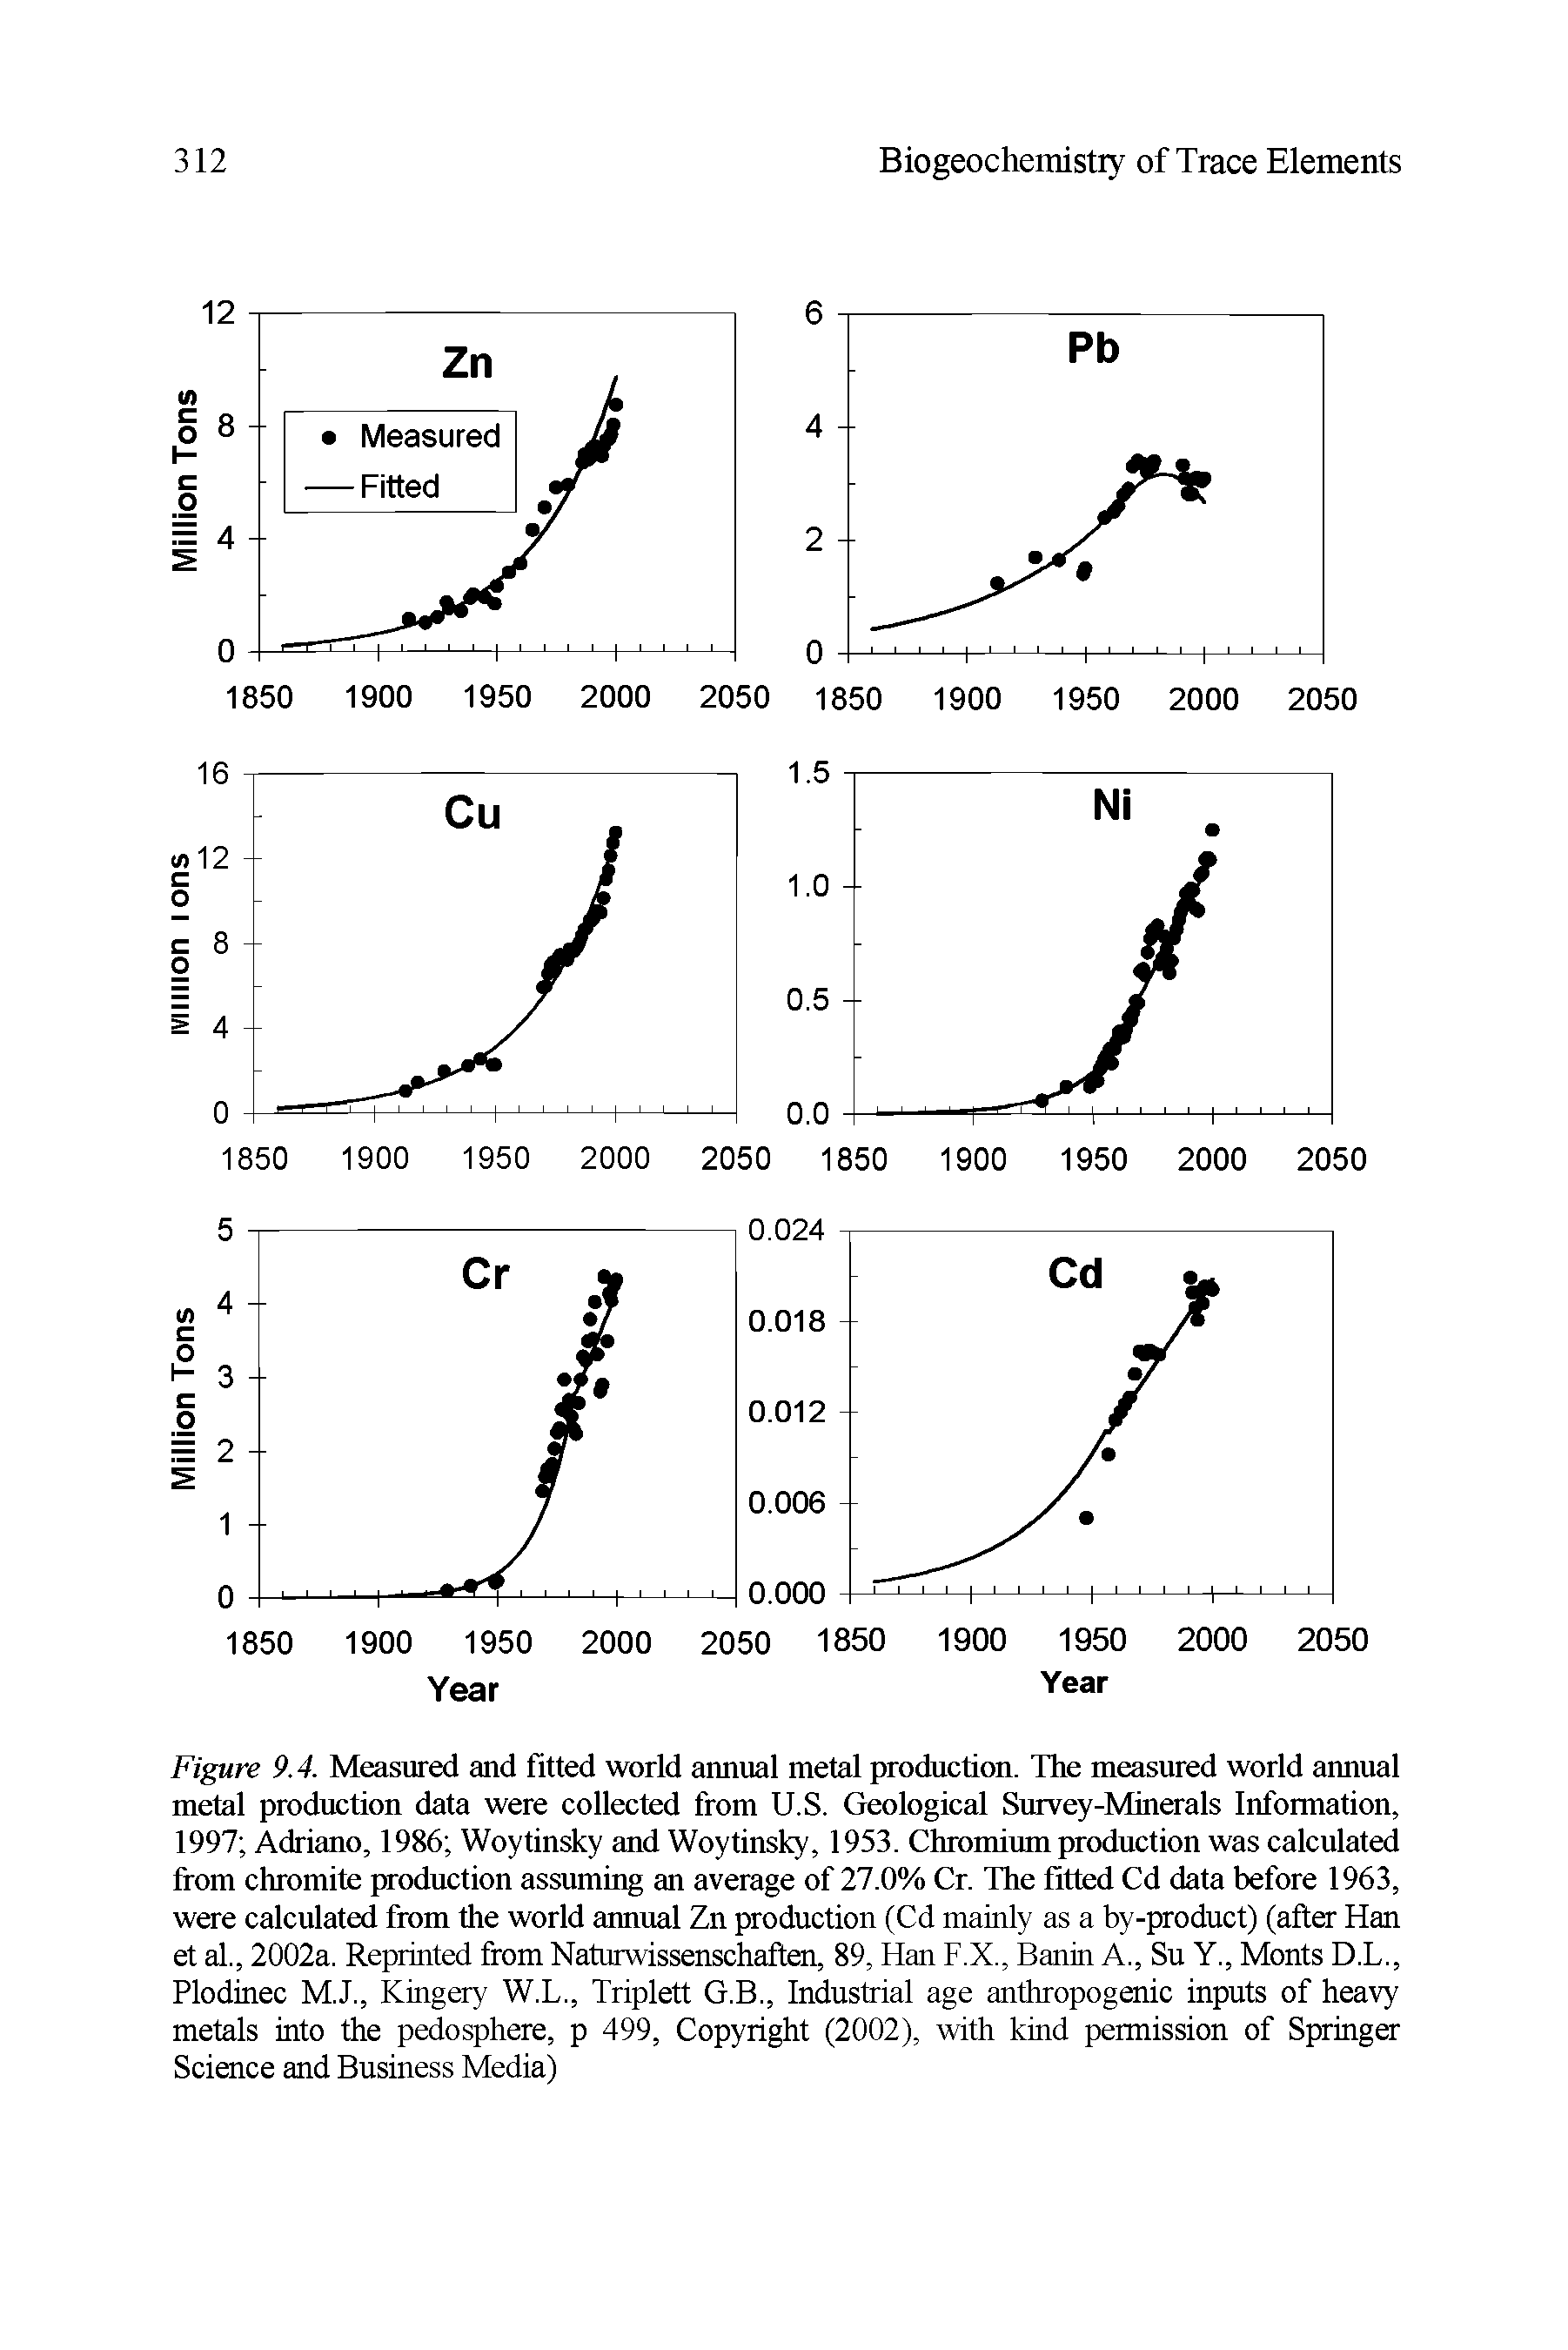 Figure 9.4. Measured and fitted world annual metal production. The measured world annual metal production data were collected from U.S. Geological Survey-Minerals Information, 1997 Adriano, 1986 Woytinsky and Woytinsky, 1953. Chromium production was calculated from chromite production assuming an average of 27.0% Cr. The fitted Cd data before 1963, were calculated from the world annual Zn production (Cd mainly as a by-product) (after Han et al., 2002a. Reprinted from Naturwissenschaften, 89, Han F.X., Banin A., Su Y., Monts D.L., Plodinec M.J., Kingery W.L., Triplett G.B., Industrial age anthropogenic inputs of heavy metals into the pedosphere, p 499, Copyright (2002), with kind permission of Springer Science and Business Media)...